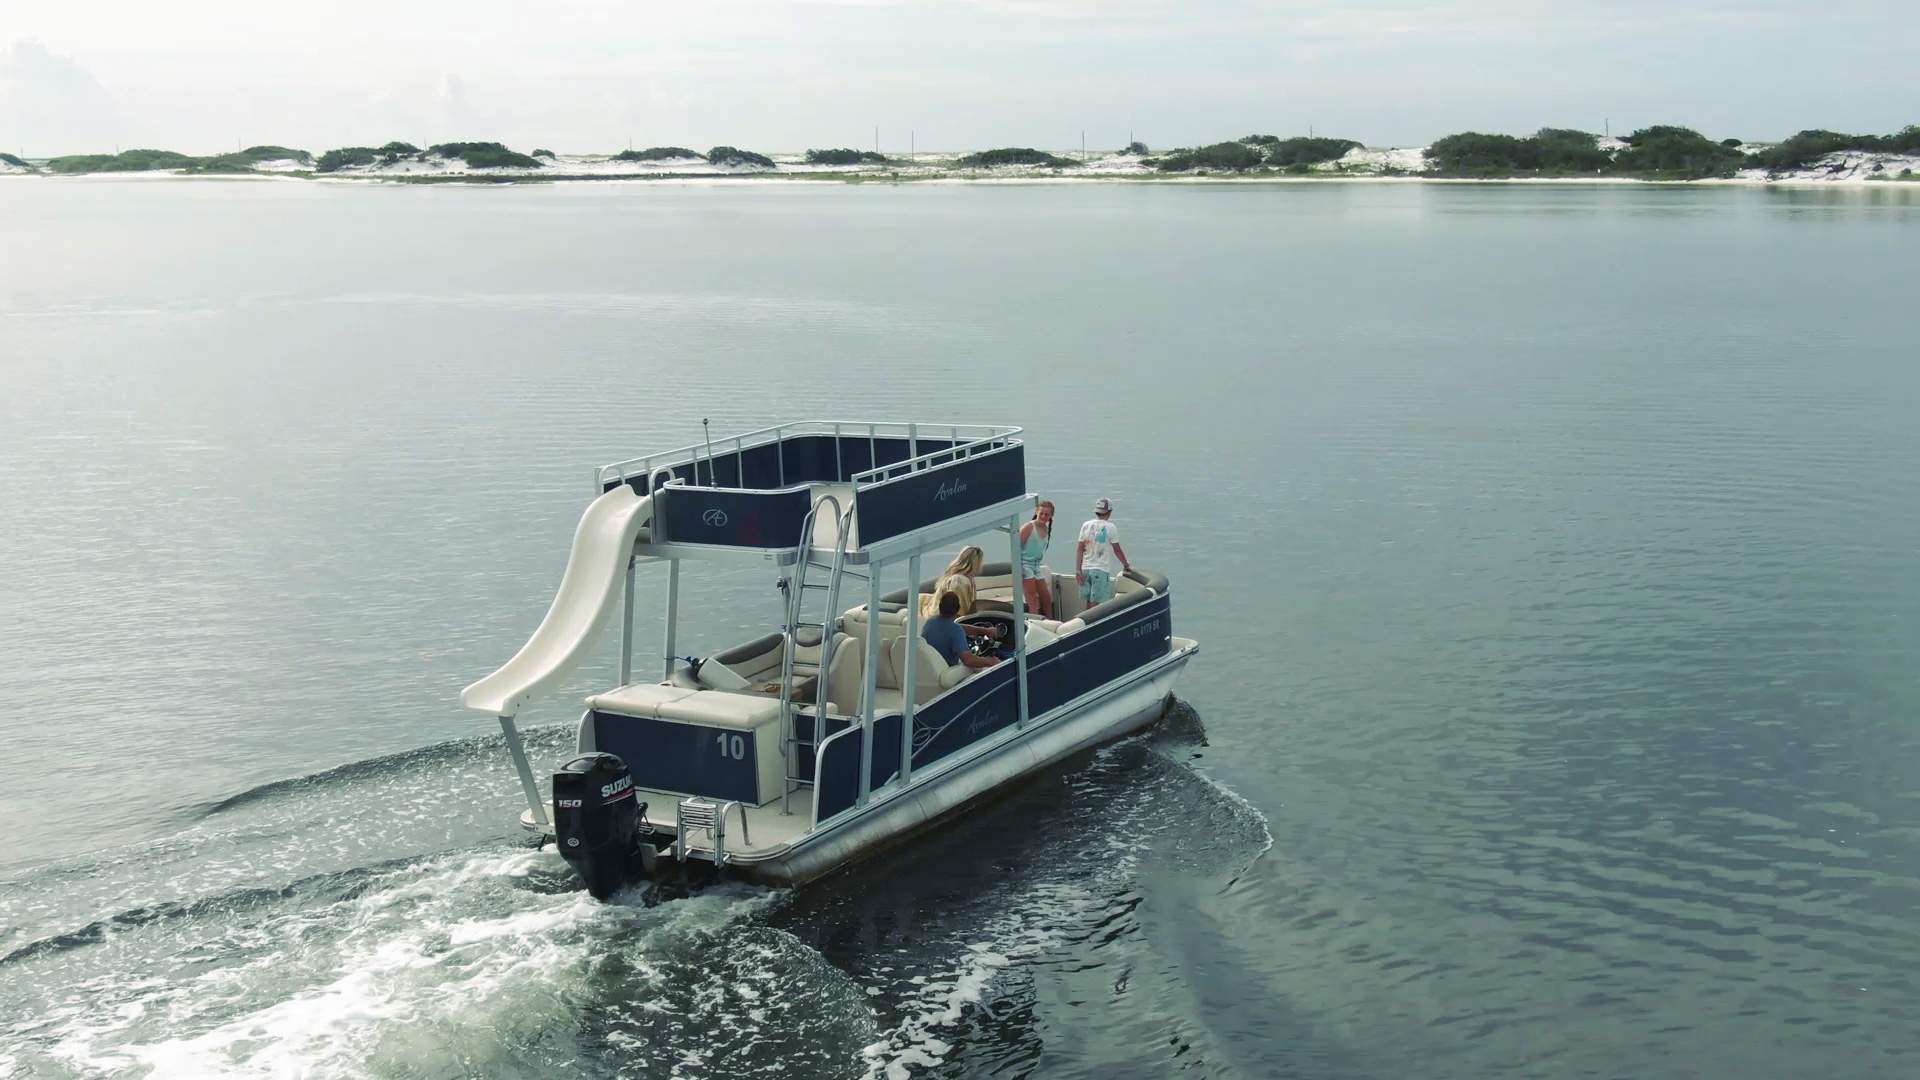 A blue Avalon double-decker Pontoon Boat with a white Slide coming off the back idles across the glassy water of Navarre's intercoastal waterway